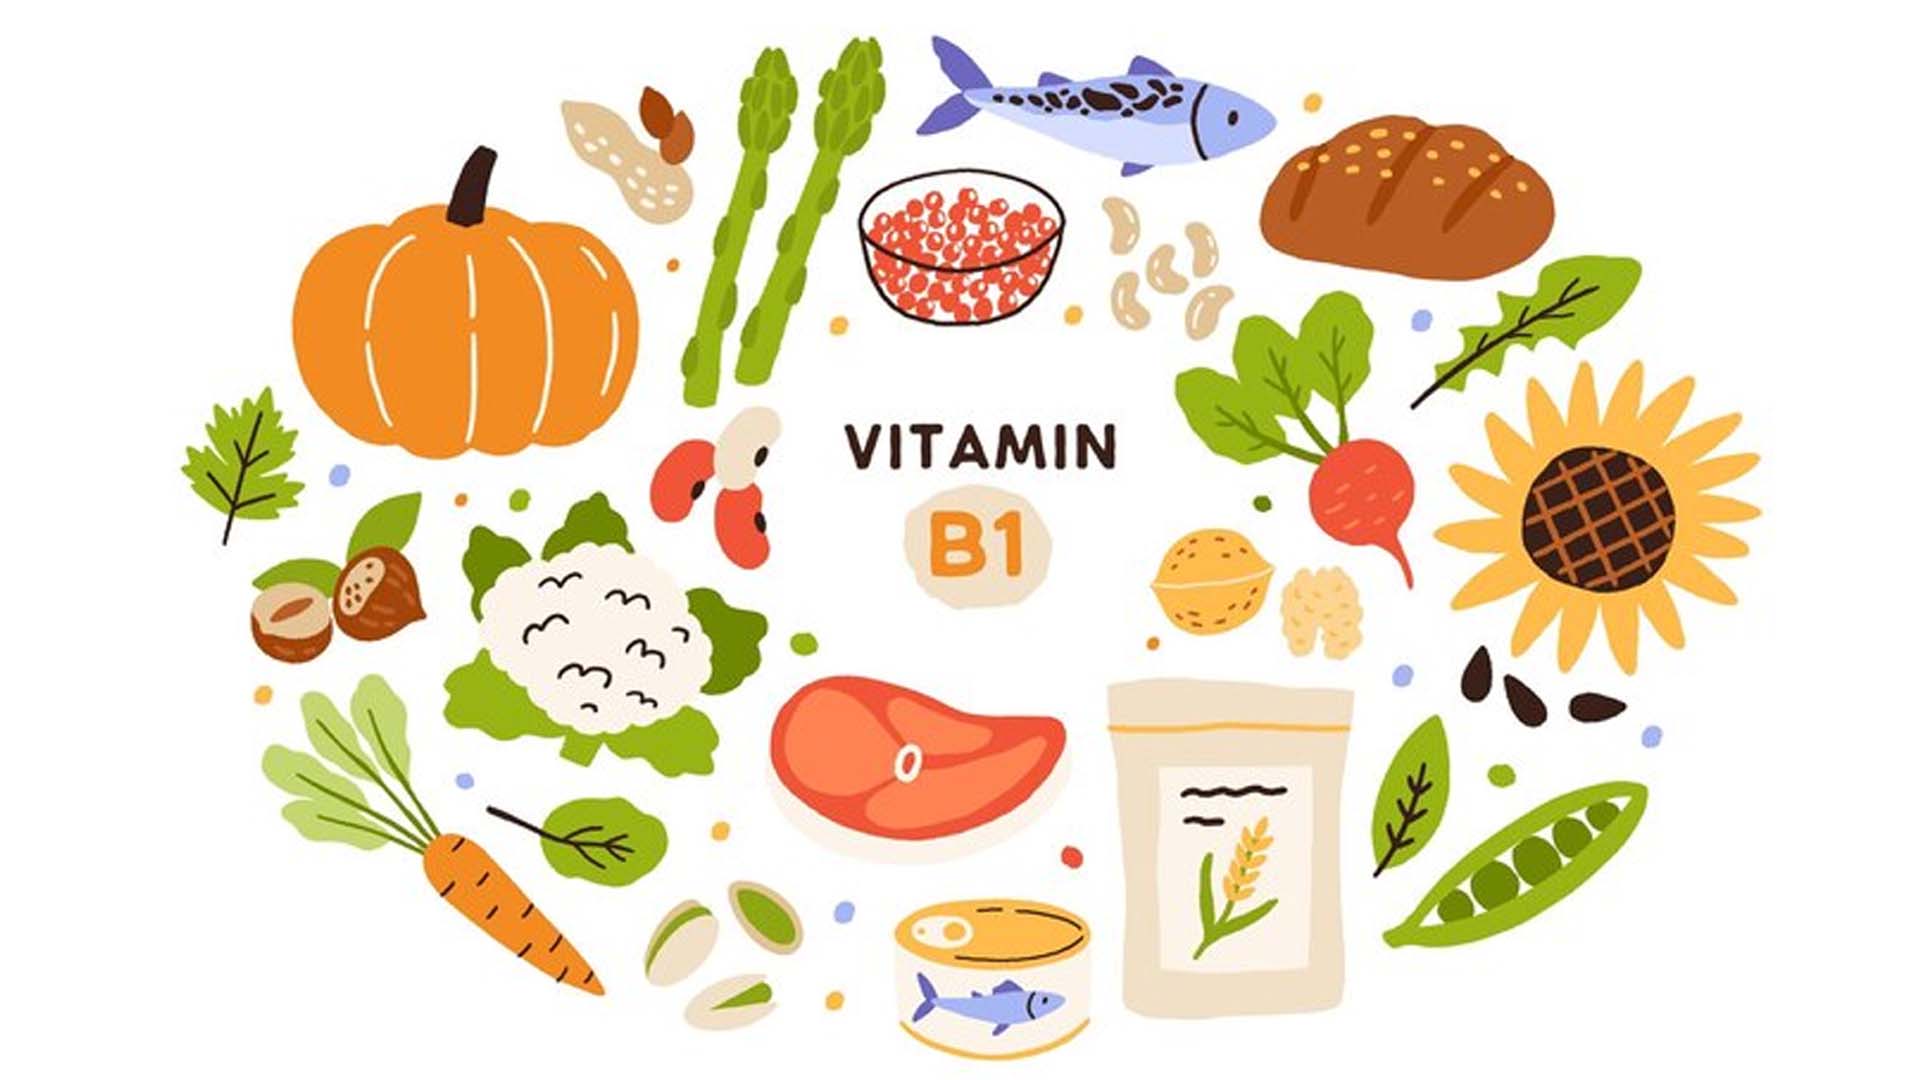 What are the Foods sources of Vitamin b1 (Thiamine)?